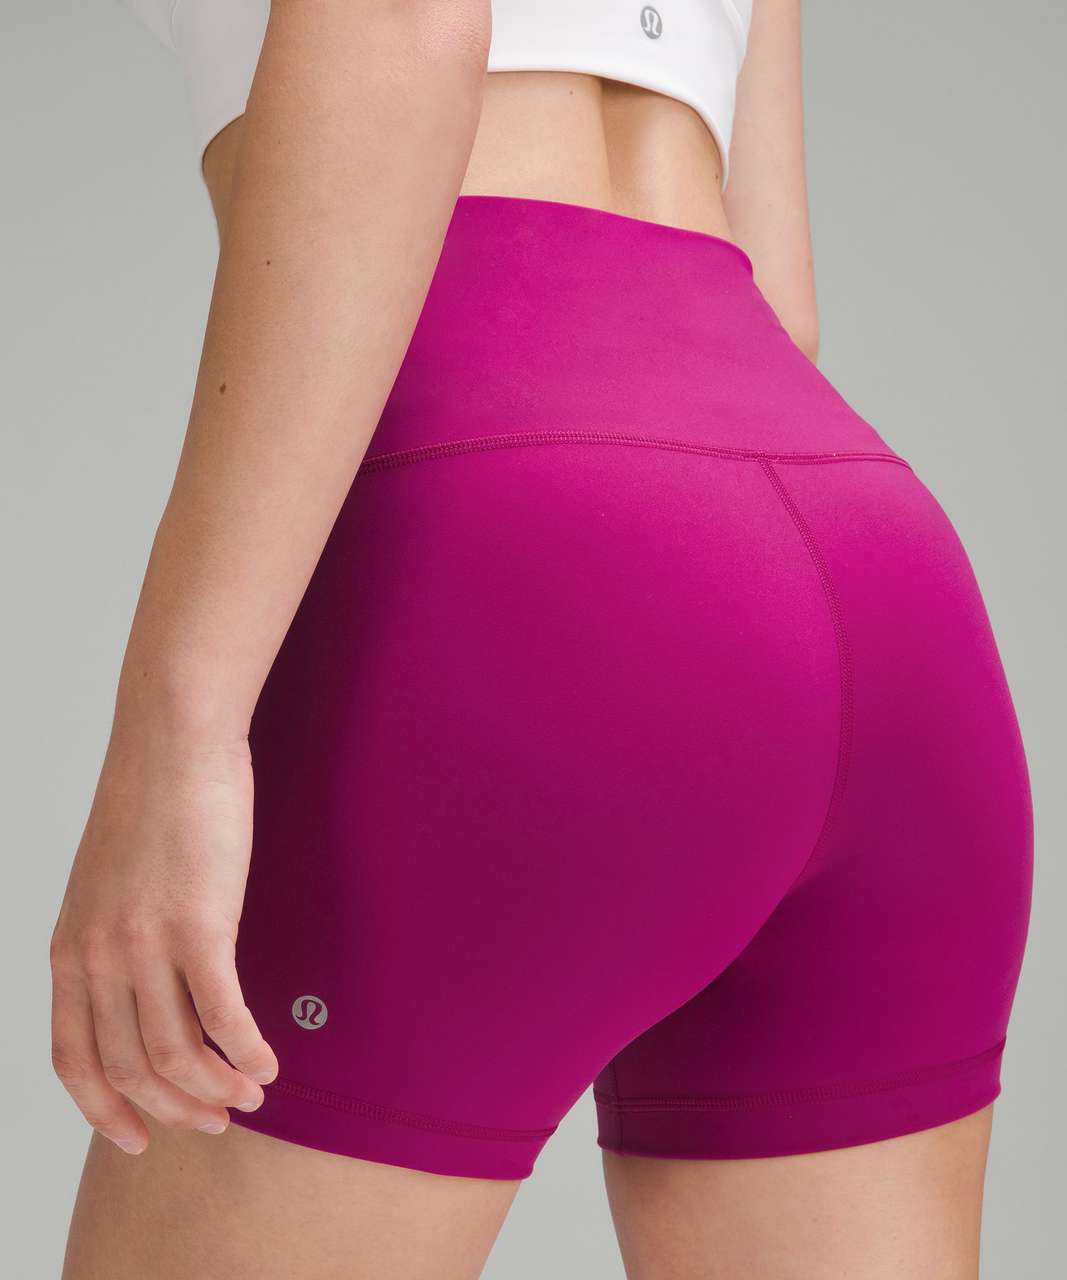 Lululemon Wunder Train High-Rise Tight 28 Topography Multi Pink Size 4 -  $69 - From Bryan